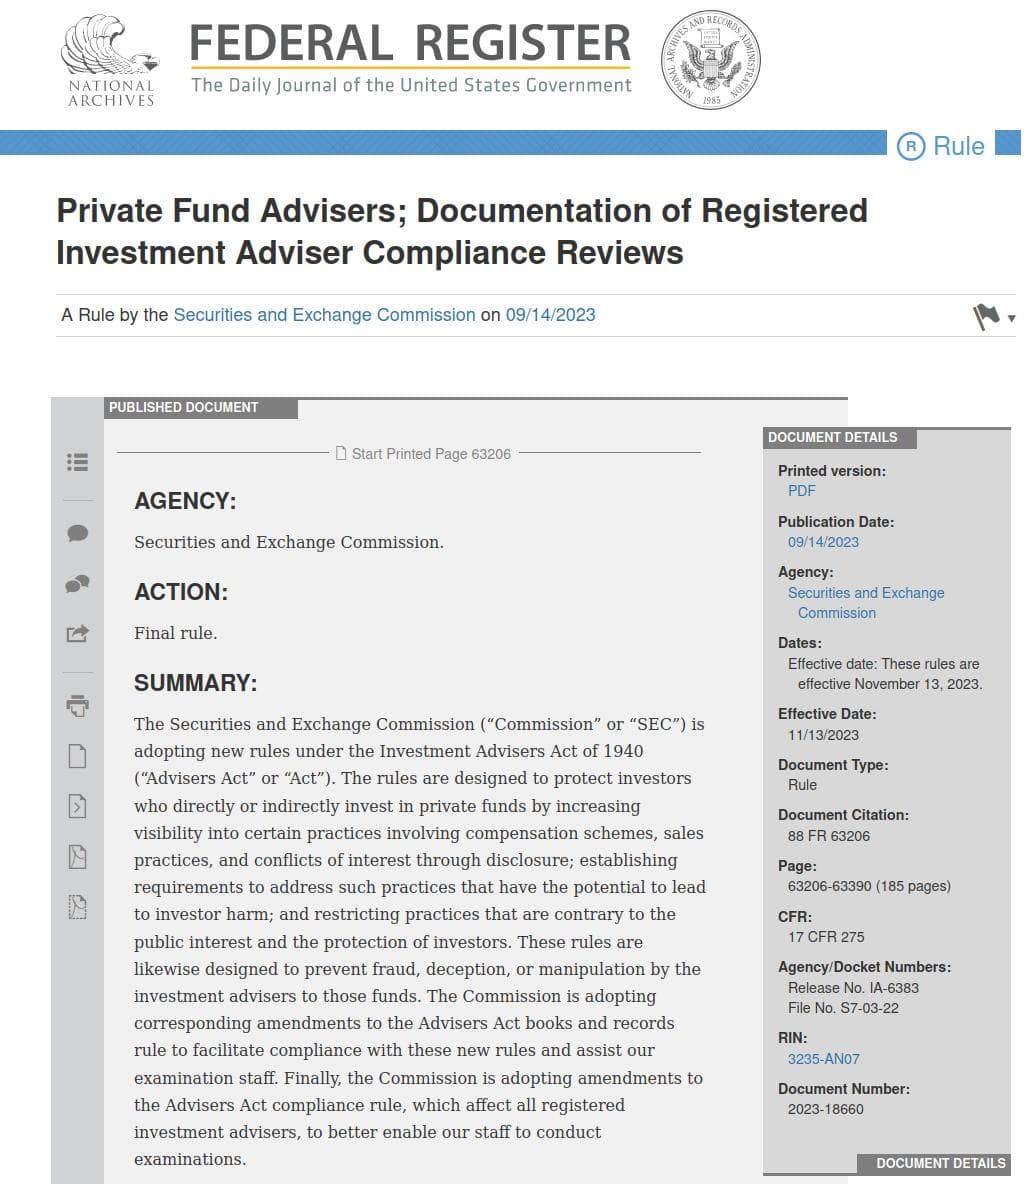 Source: https://www.federalregister.gov/documents/2023/09/14/2023-18660/private-fund-advisers-documentation-of-registered-investment-adviser-compliance-reviews